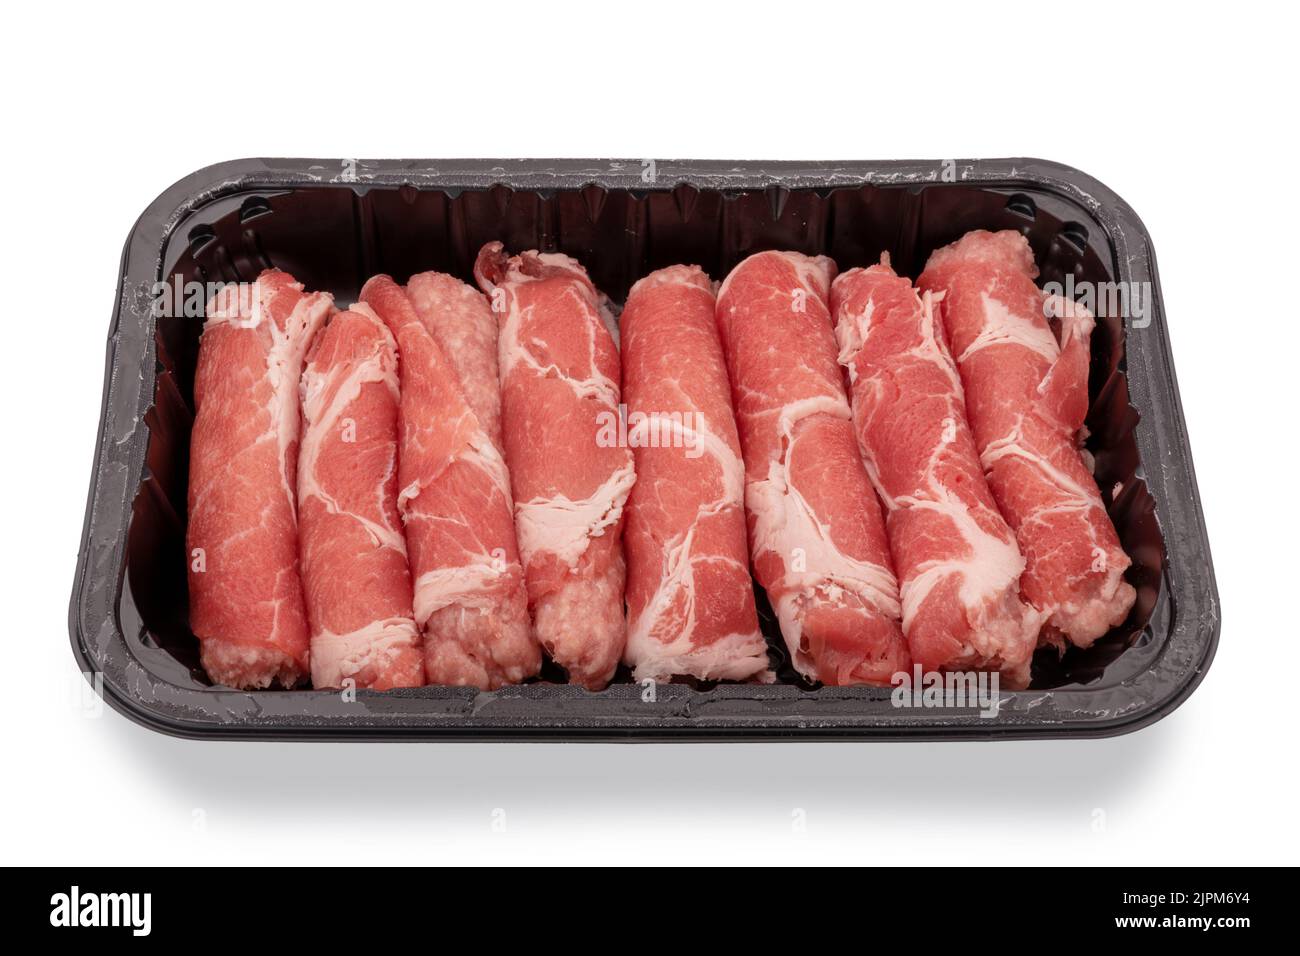 Pork neck steak rolls (capocollo)  in plastic food tray for sale in supermarket isolated on white, clipping path Stock Photo